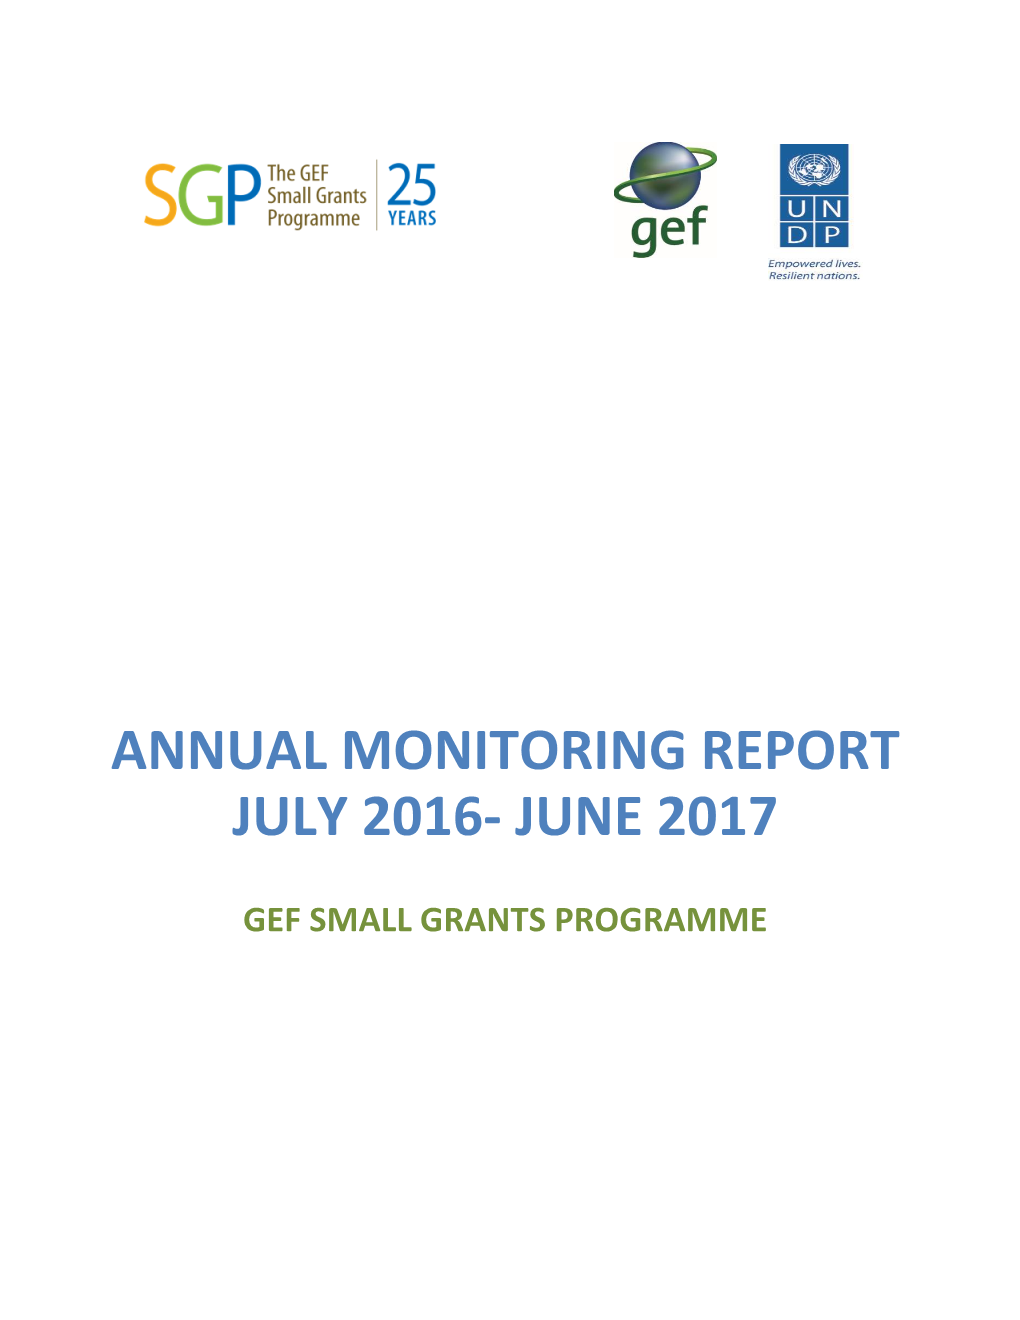 Annual Monitoring Report July 2016- June 2017